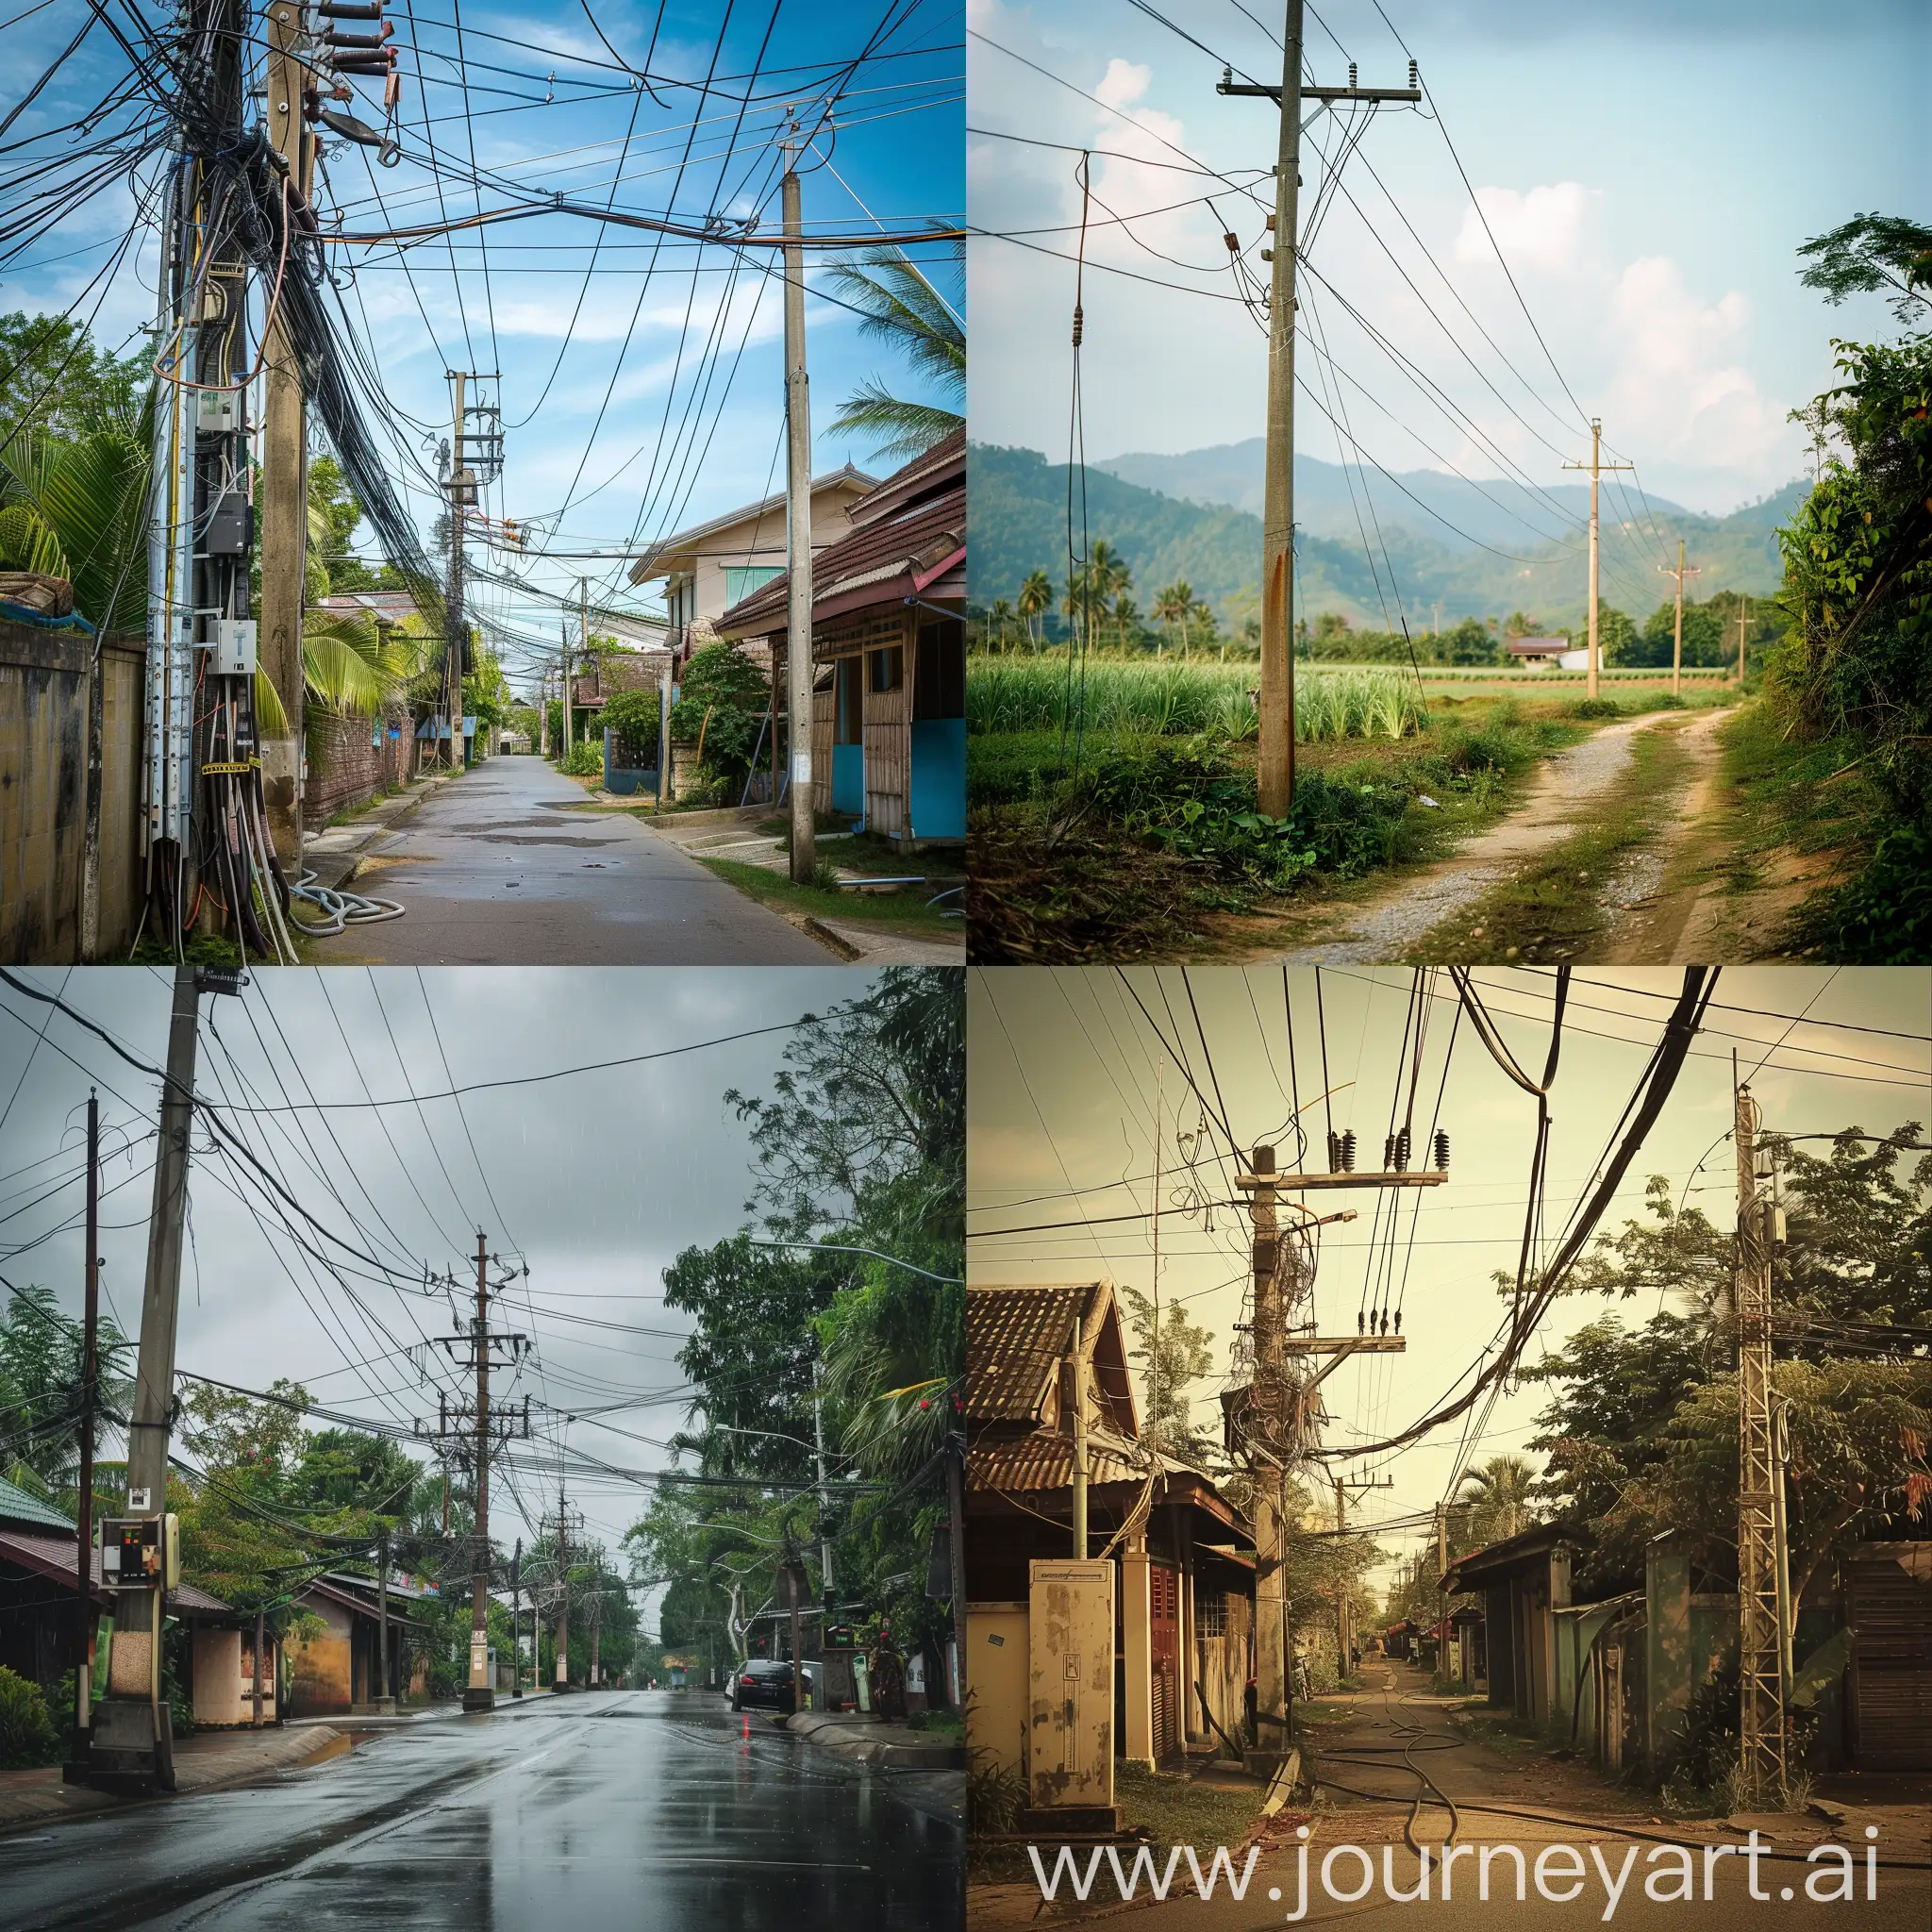 electric pole kinnaree in thailand
